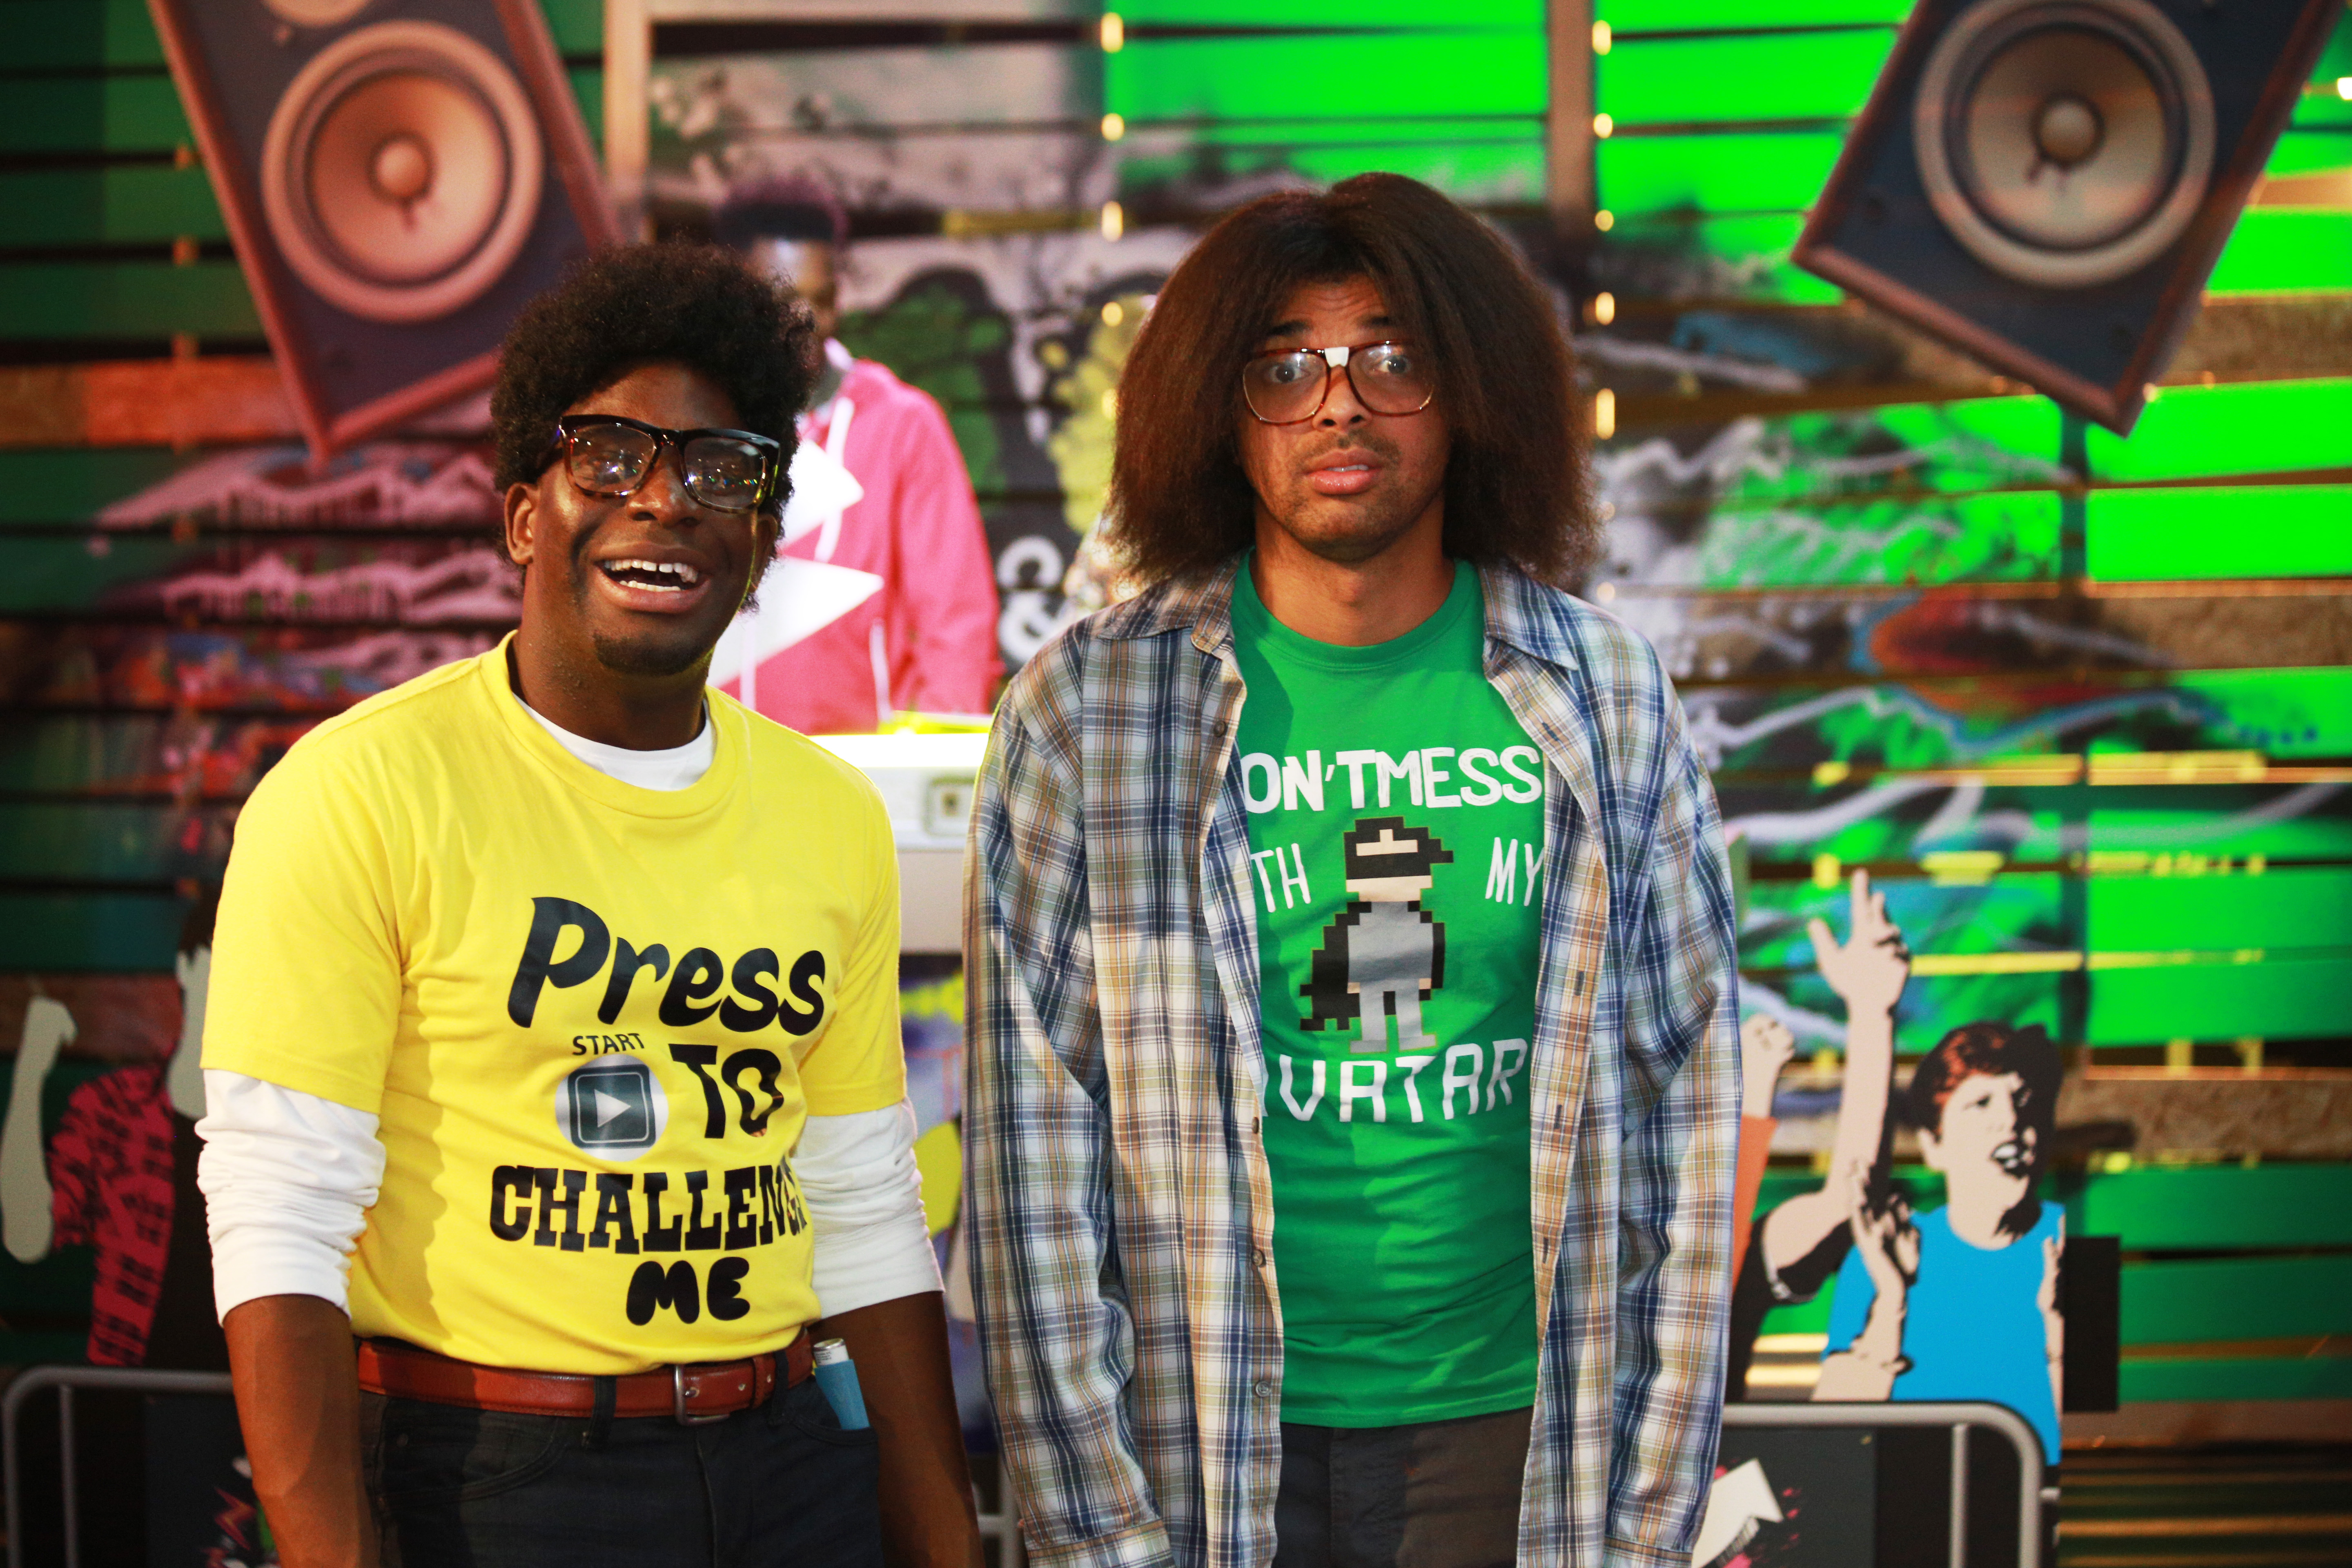 Gamer Geeks played by Johnny Cochrane and Inel Tomlinson - The Johnny and Inel Show - Series 2